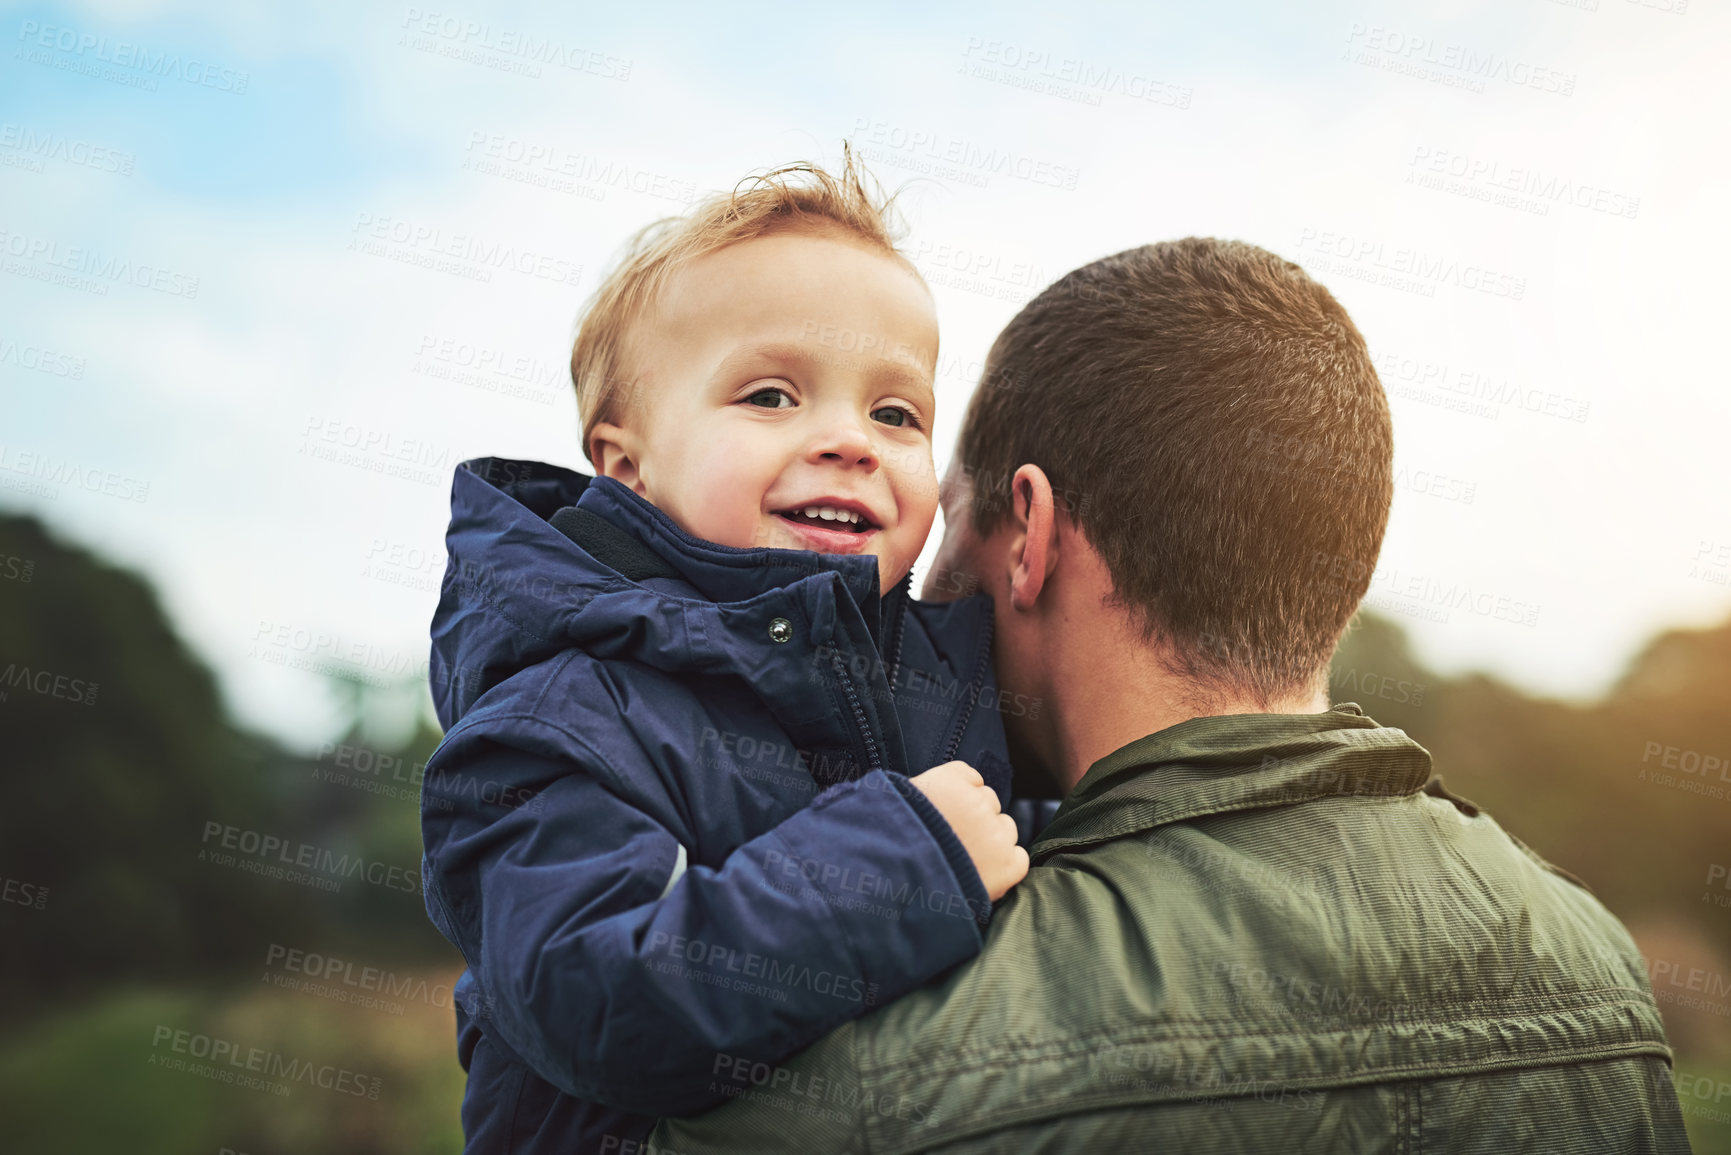 Buy stock photo Cropped shot of a father bonding with his son outside